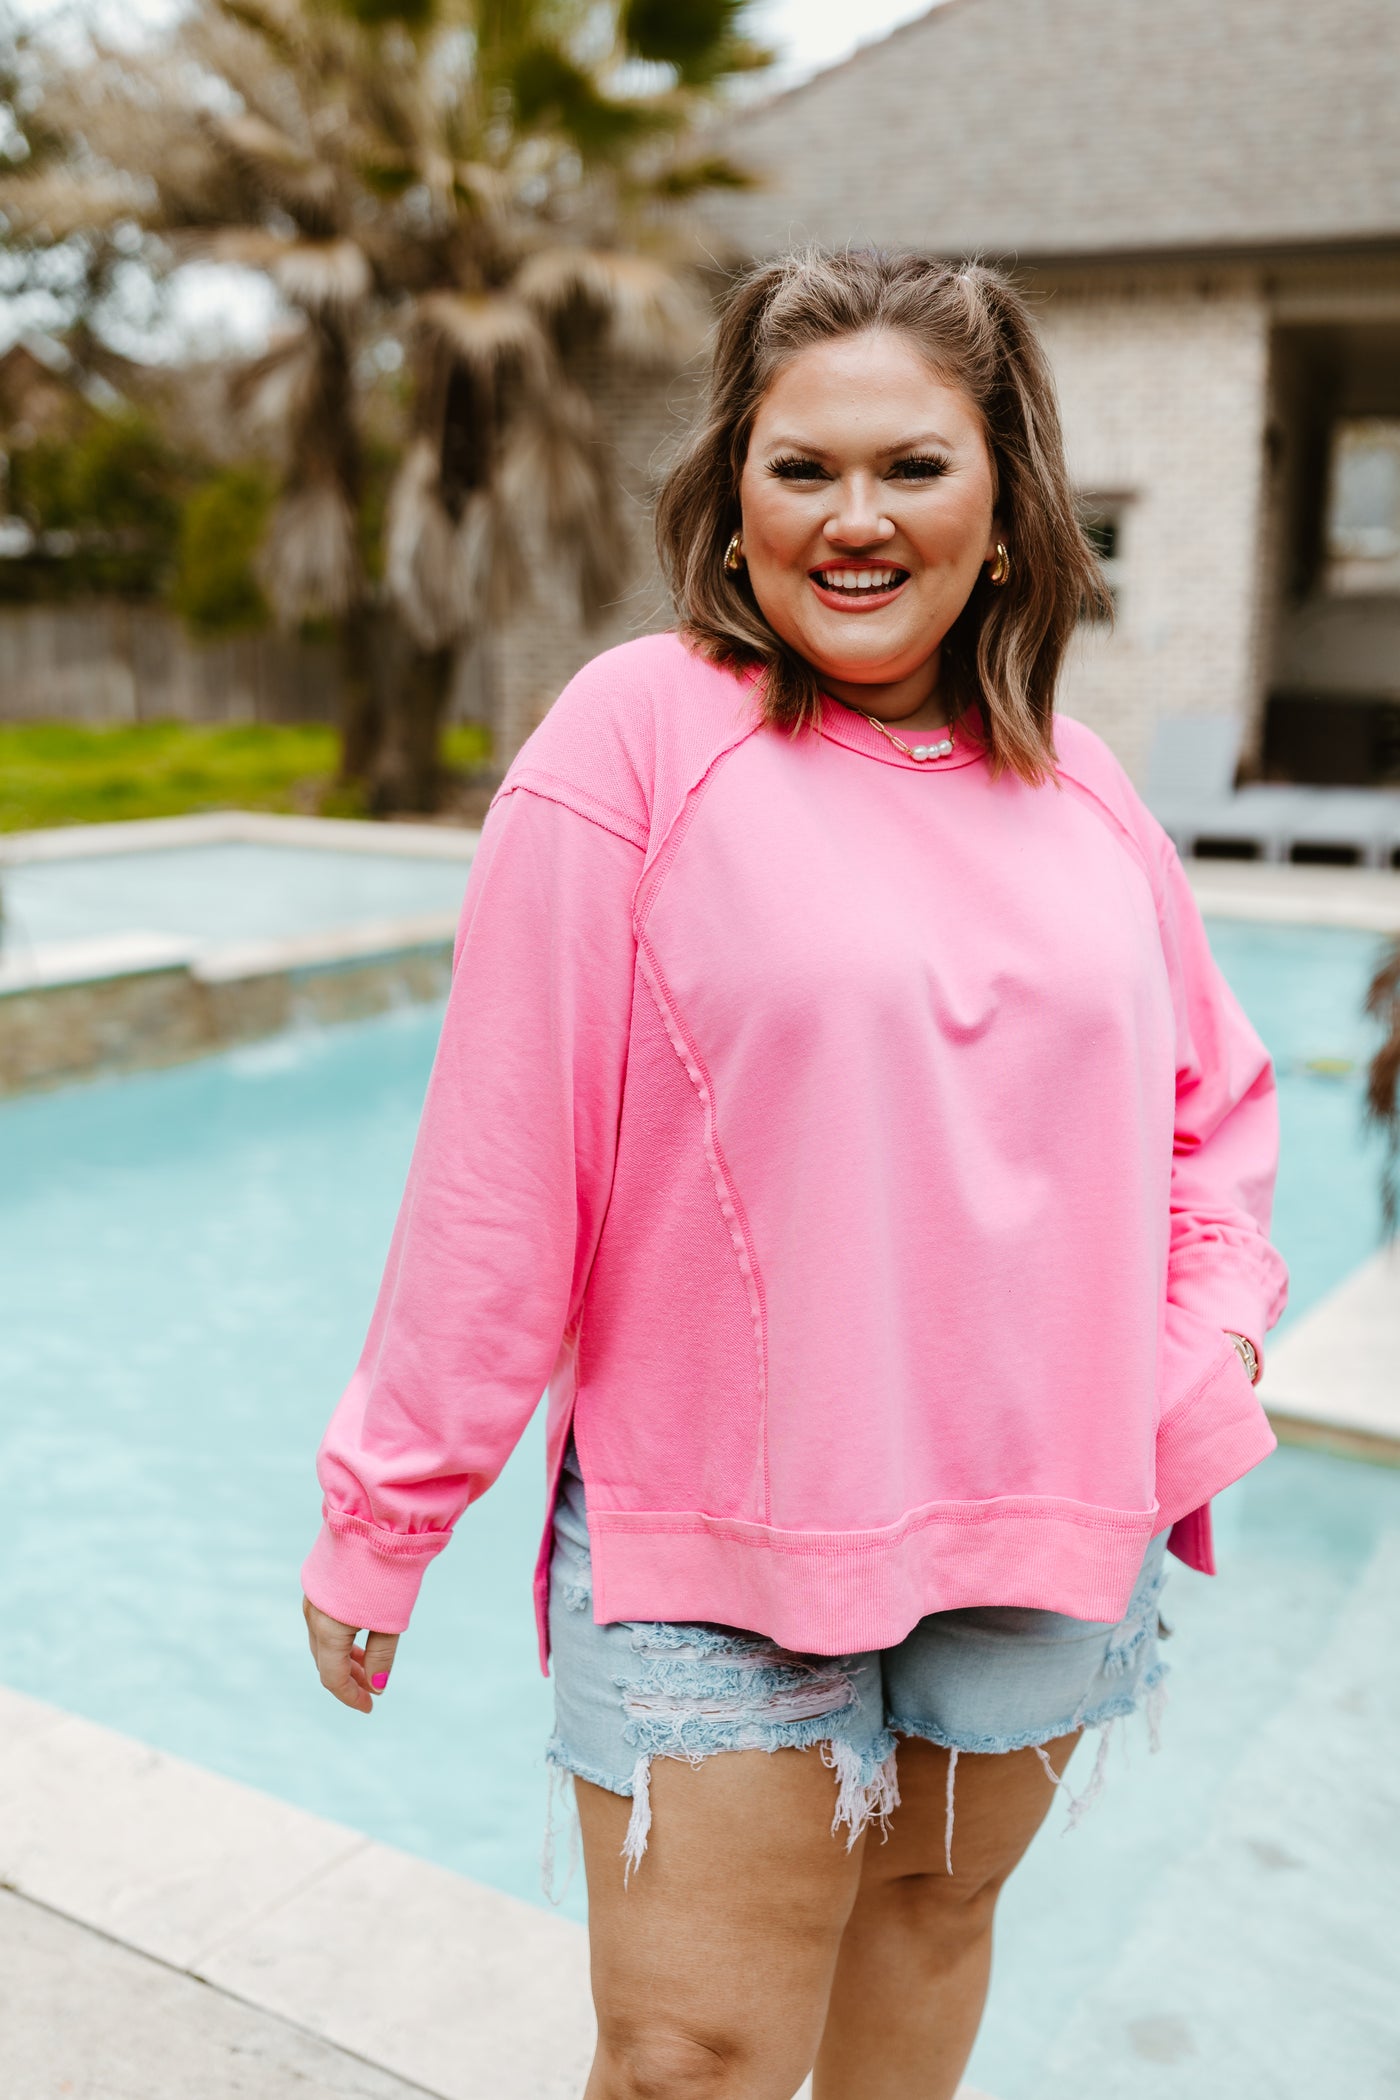 Baby Pink Contrast French Terry Oversized Top